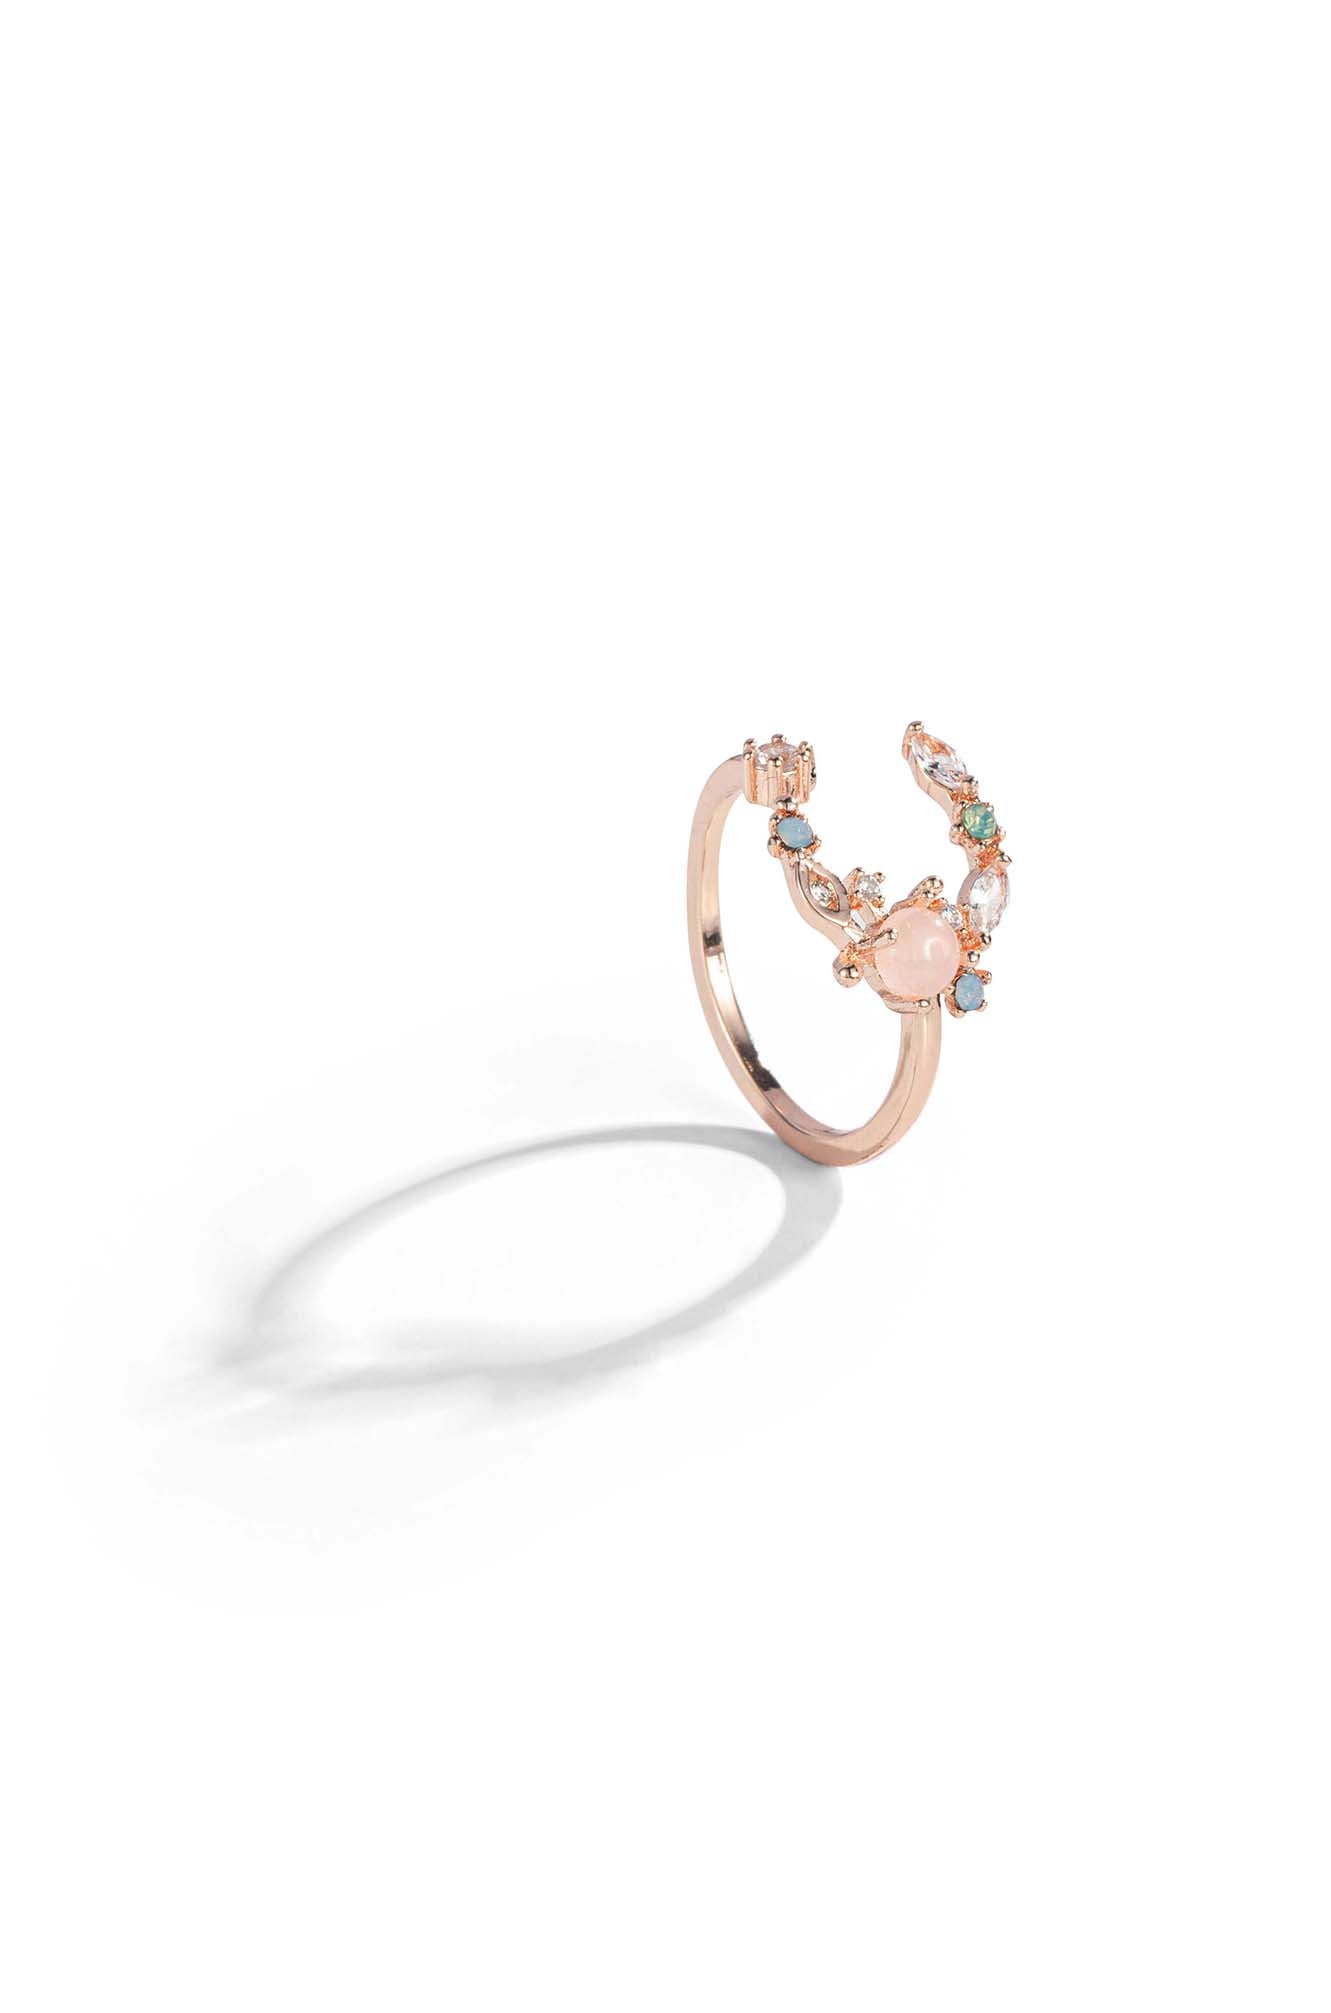 A crescent moon ring design with an open ring style and set with various sized gemstones.